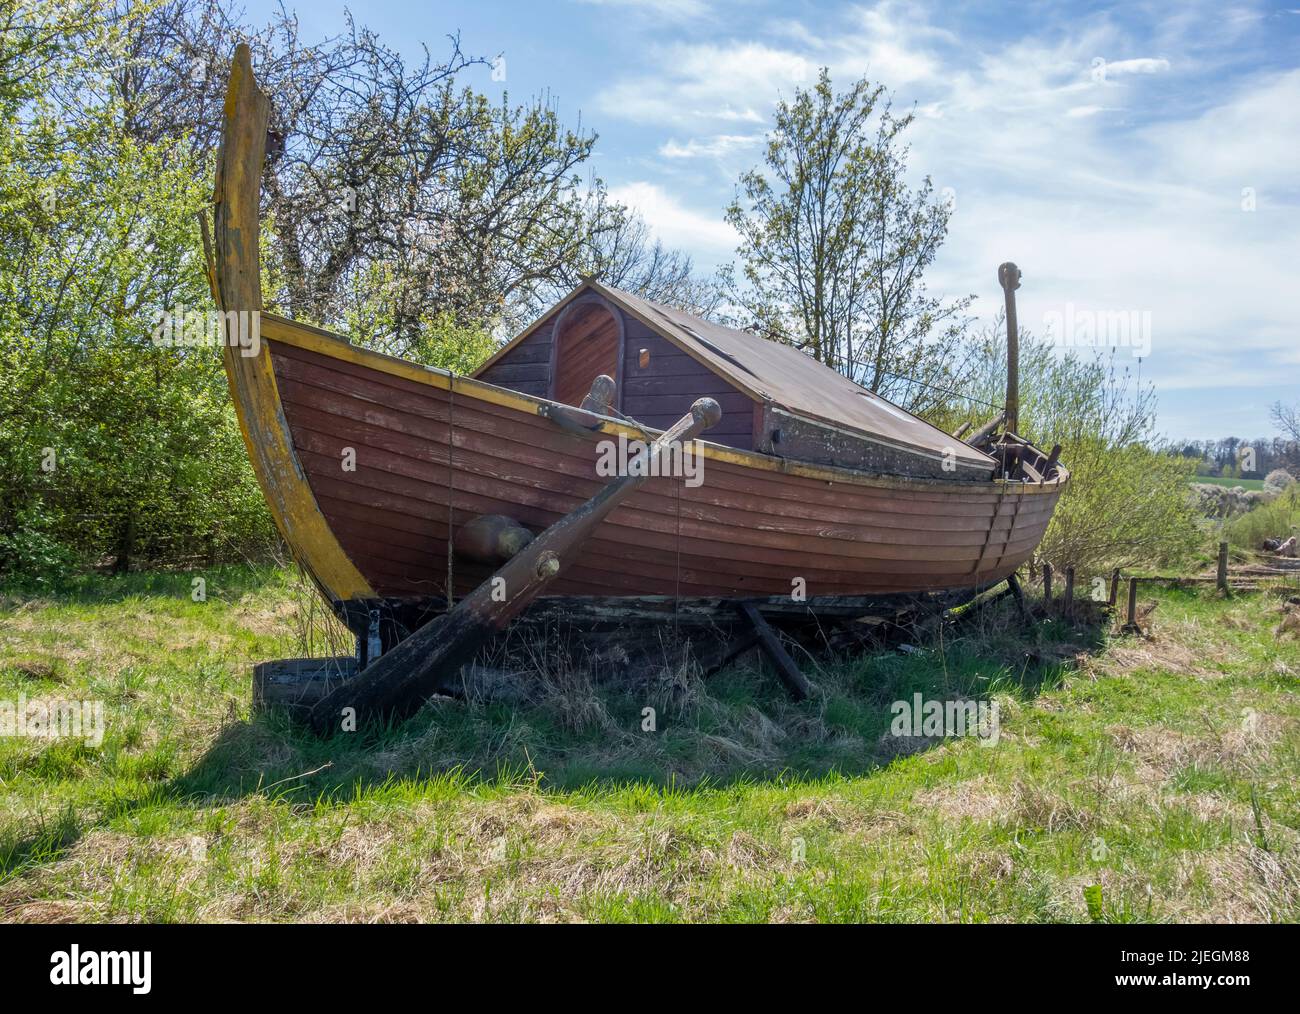 Medieval viking longboat in sunny ambiance at early spring time Stock Photo